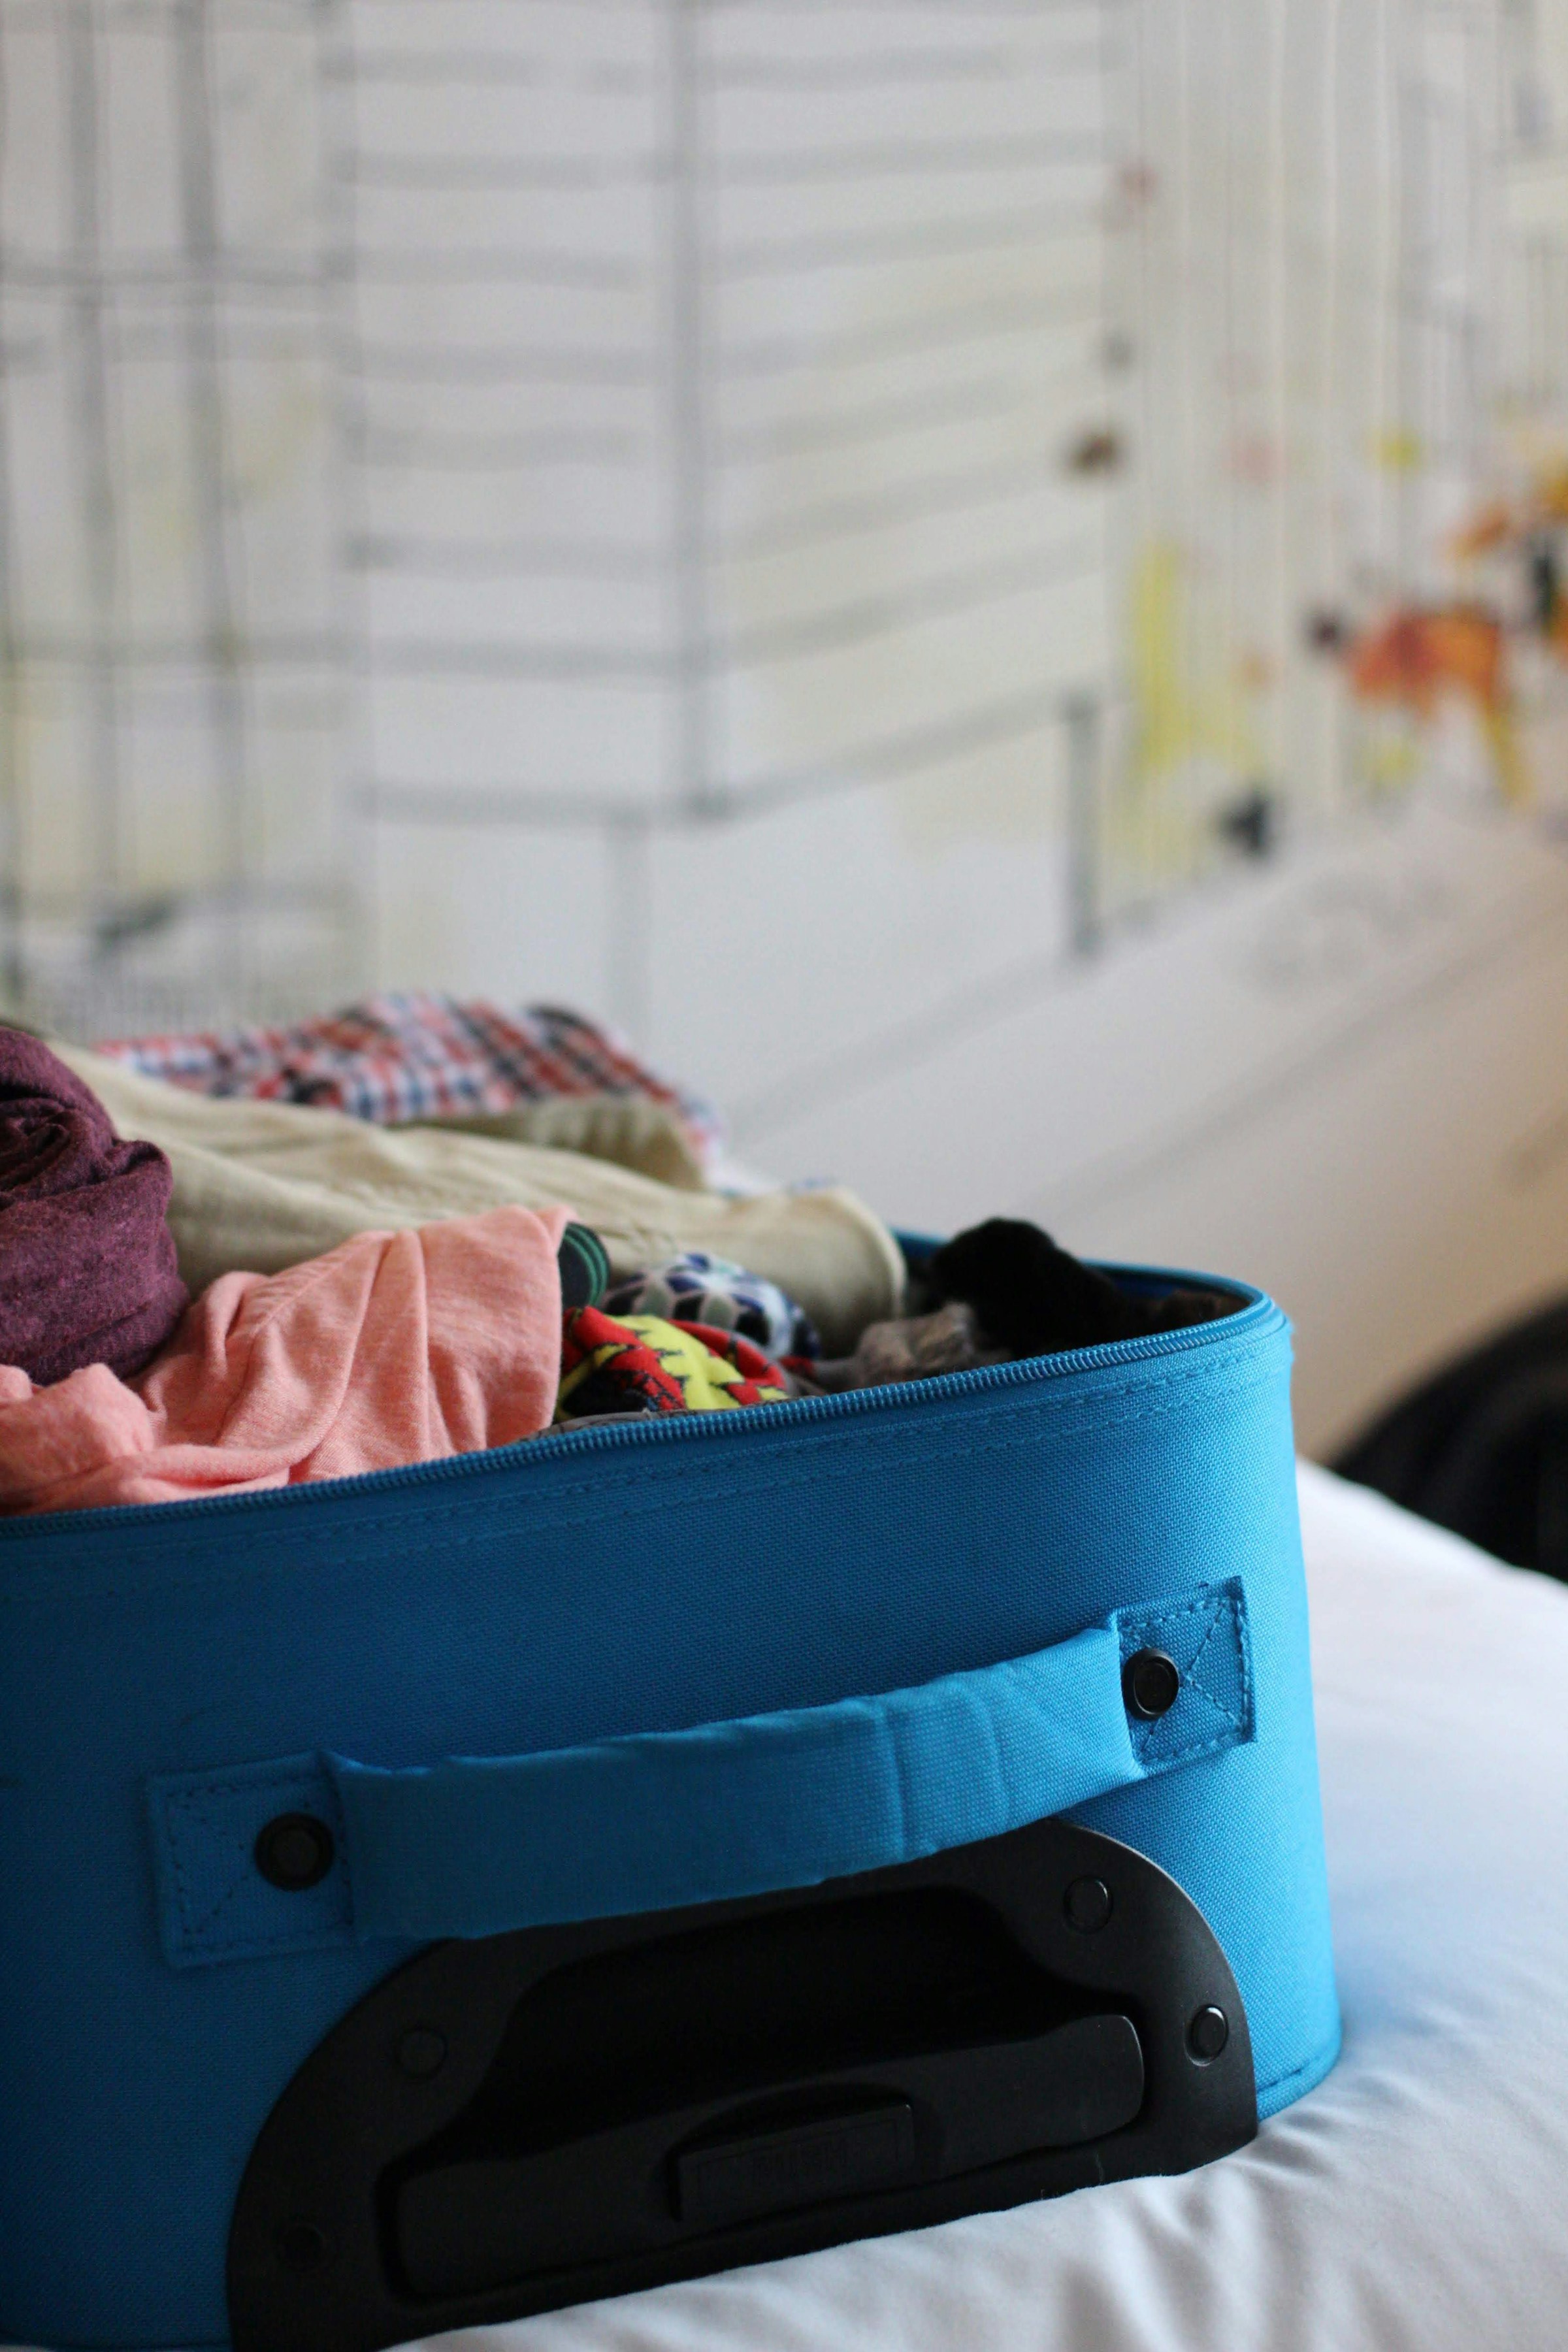 An open suitcase on a bed | Source: Unsplash